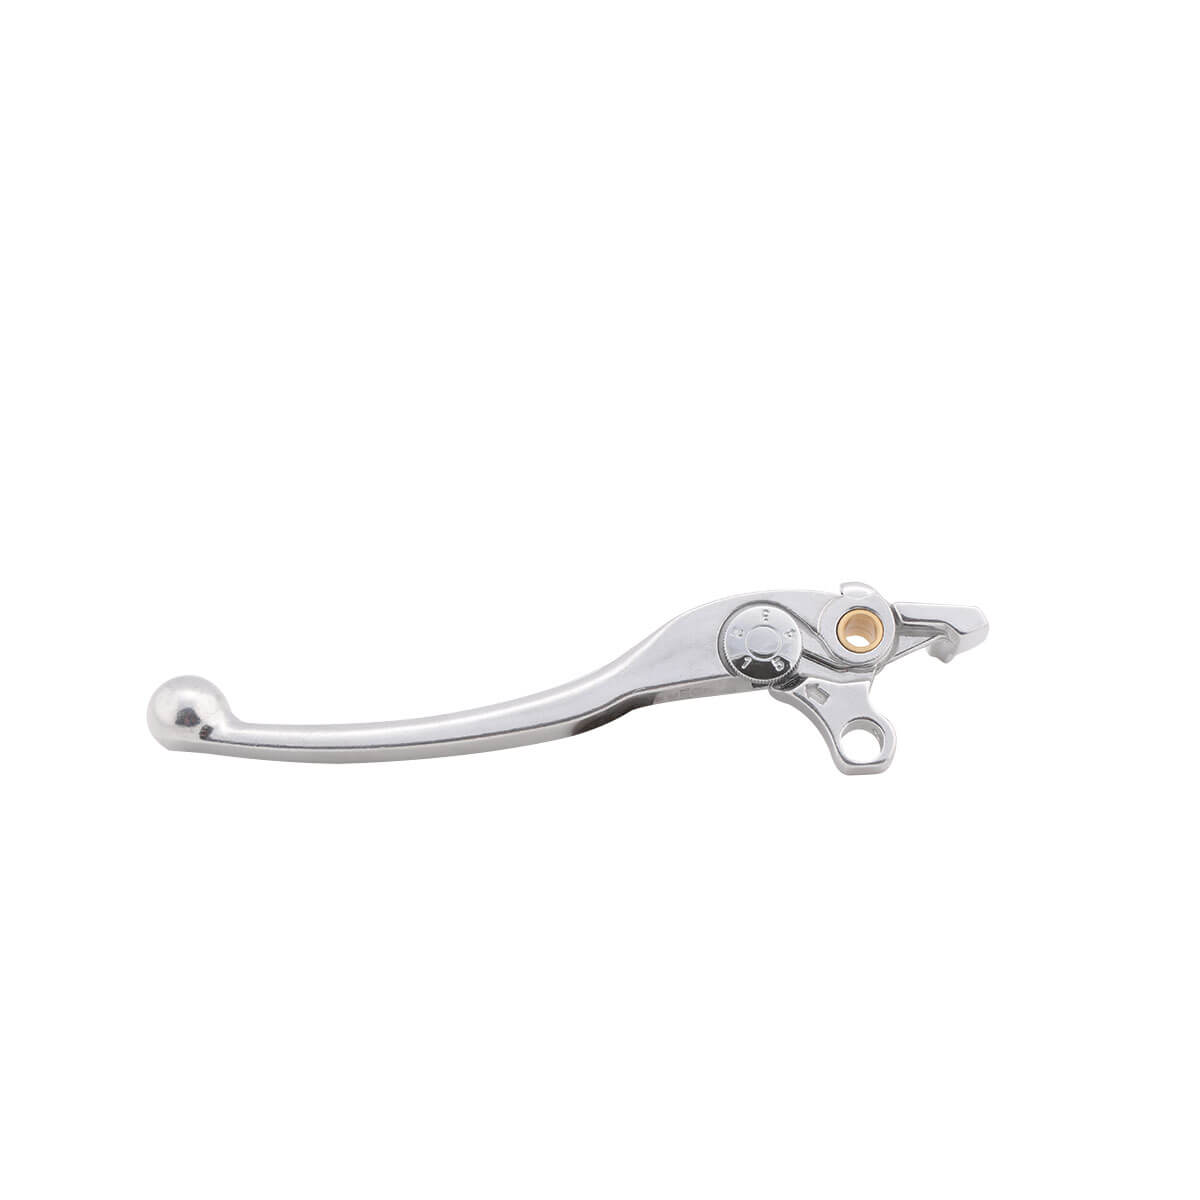 shin_yo Repair clutch lever with ABE, 5-way adjustable, type BC 724, silver